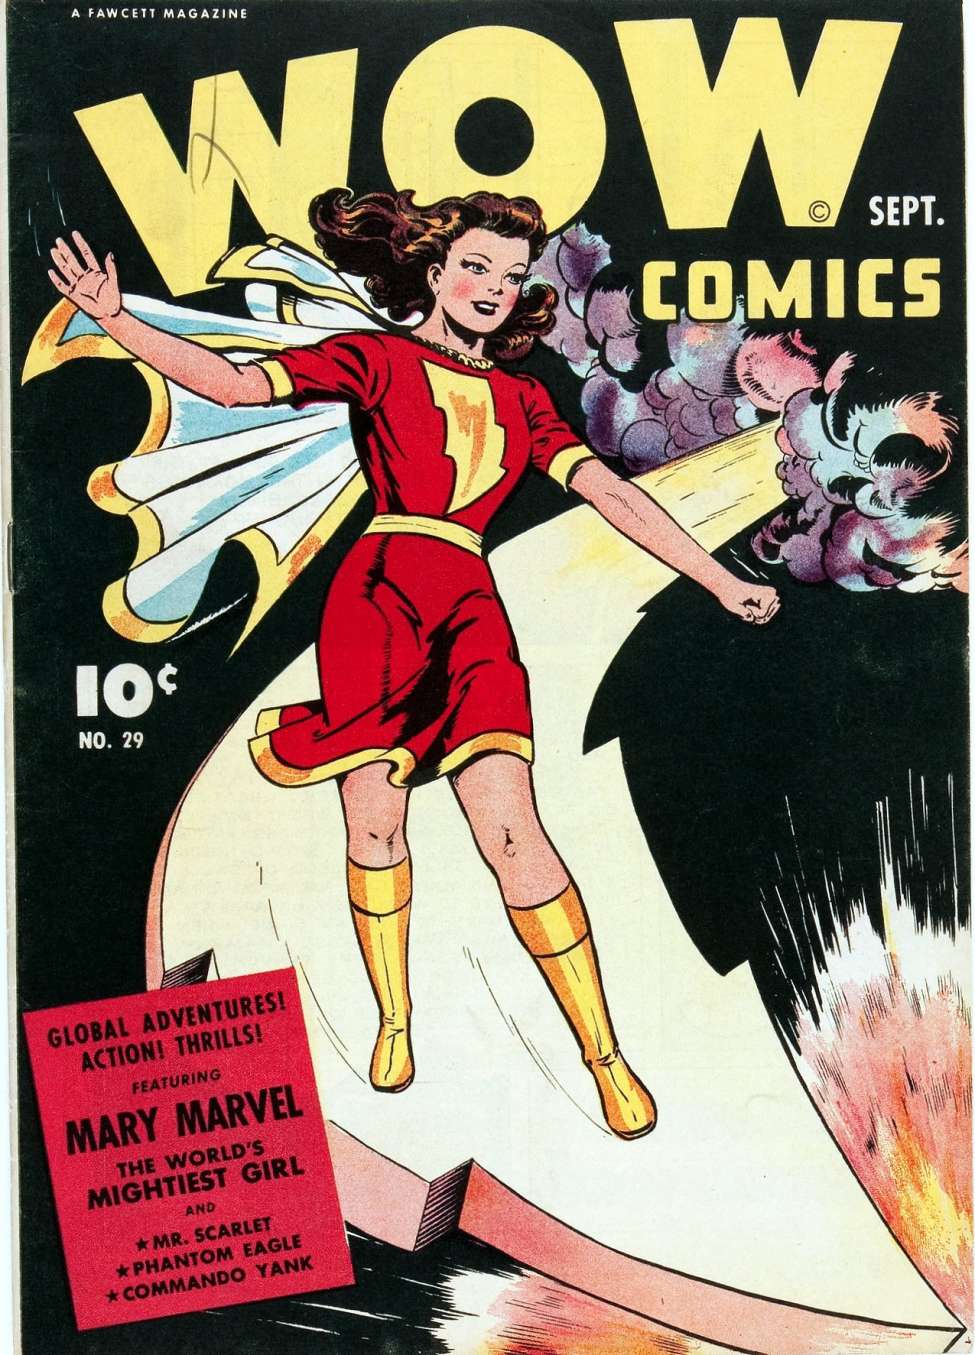 Comic Book Cover For Wow Comics 29